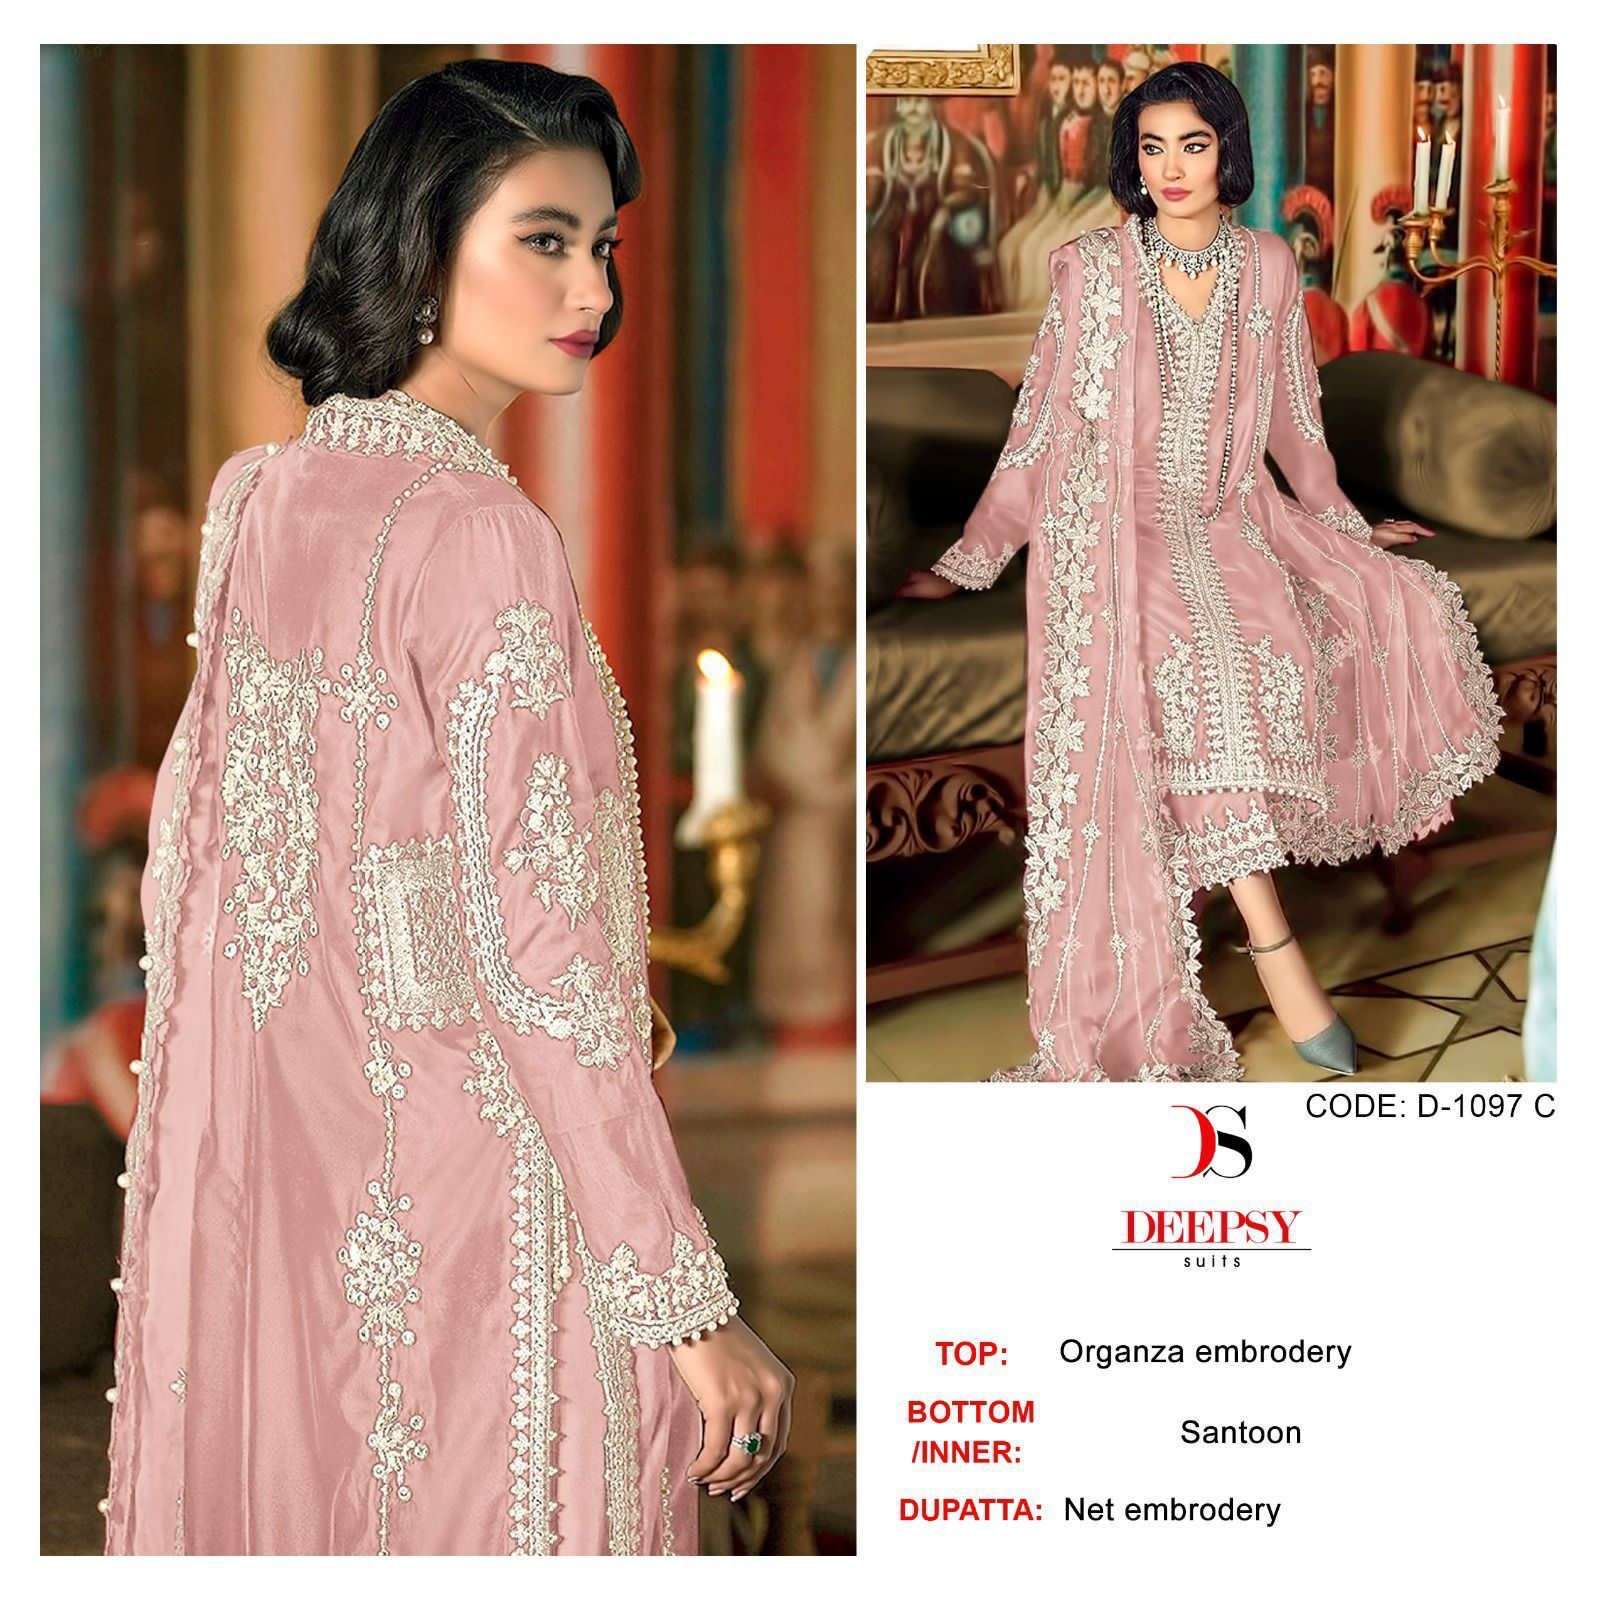 Deepsy%20Suits%201097%20Colours%20Organza%20with%20EMbroidery%20work%20Pakistani%20salwar%20kameez%20collection%20at%20best%20rate%20(2) 1 2023 12 15 14 35 57